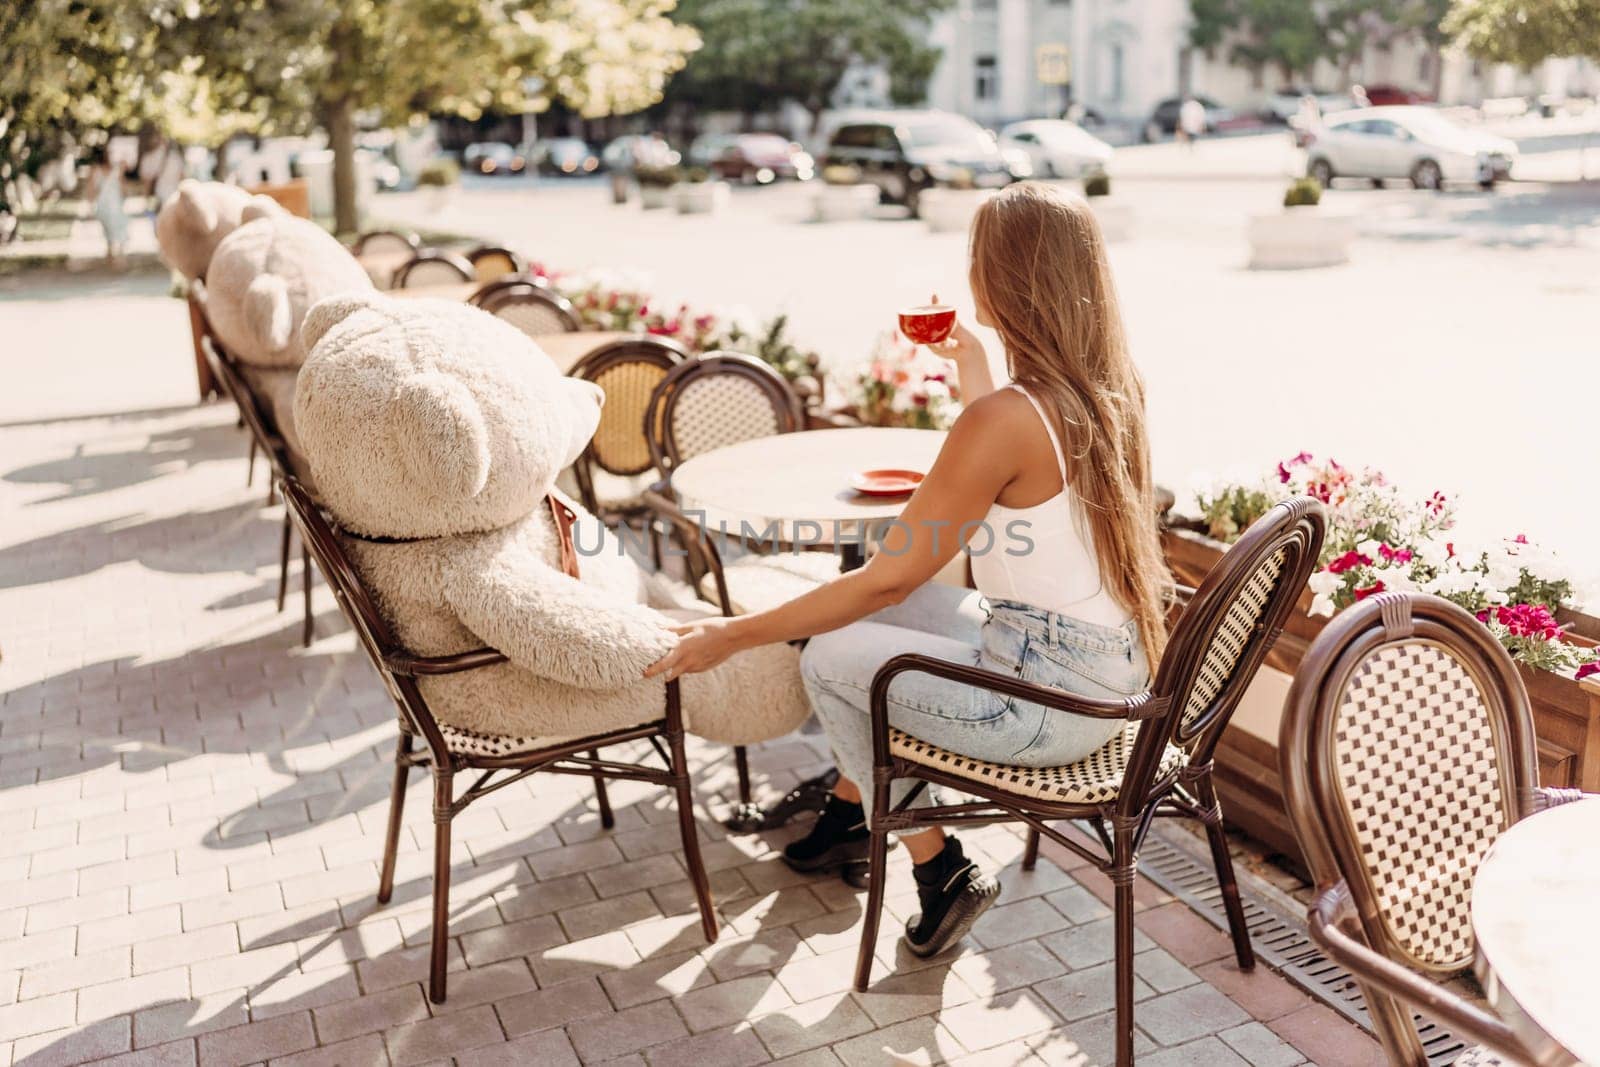 A woman sits cafe with a teddy bear next to her. The scene is set in a city with several chairs and tables around her. The woman is enjoying her time at the outdoor cafe